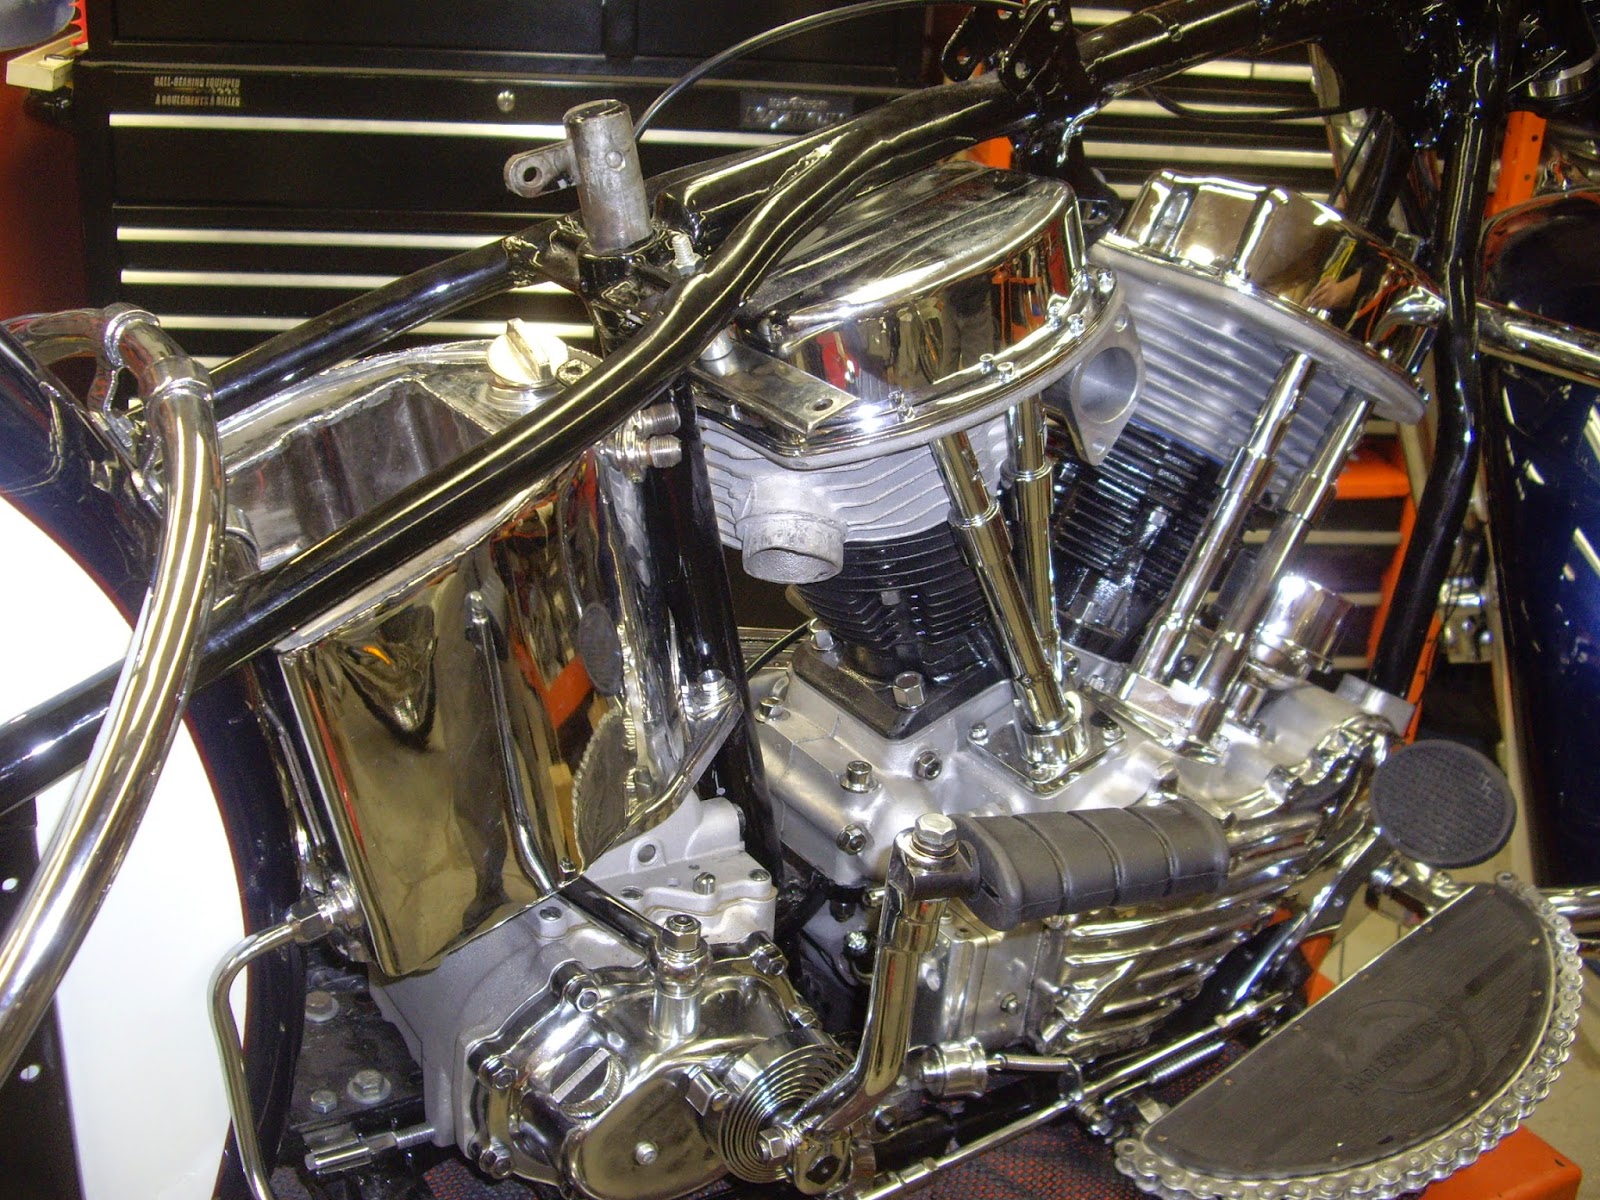 Grand opening sales on all aftermarket Harley Davidson parts.